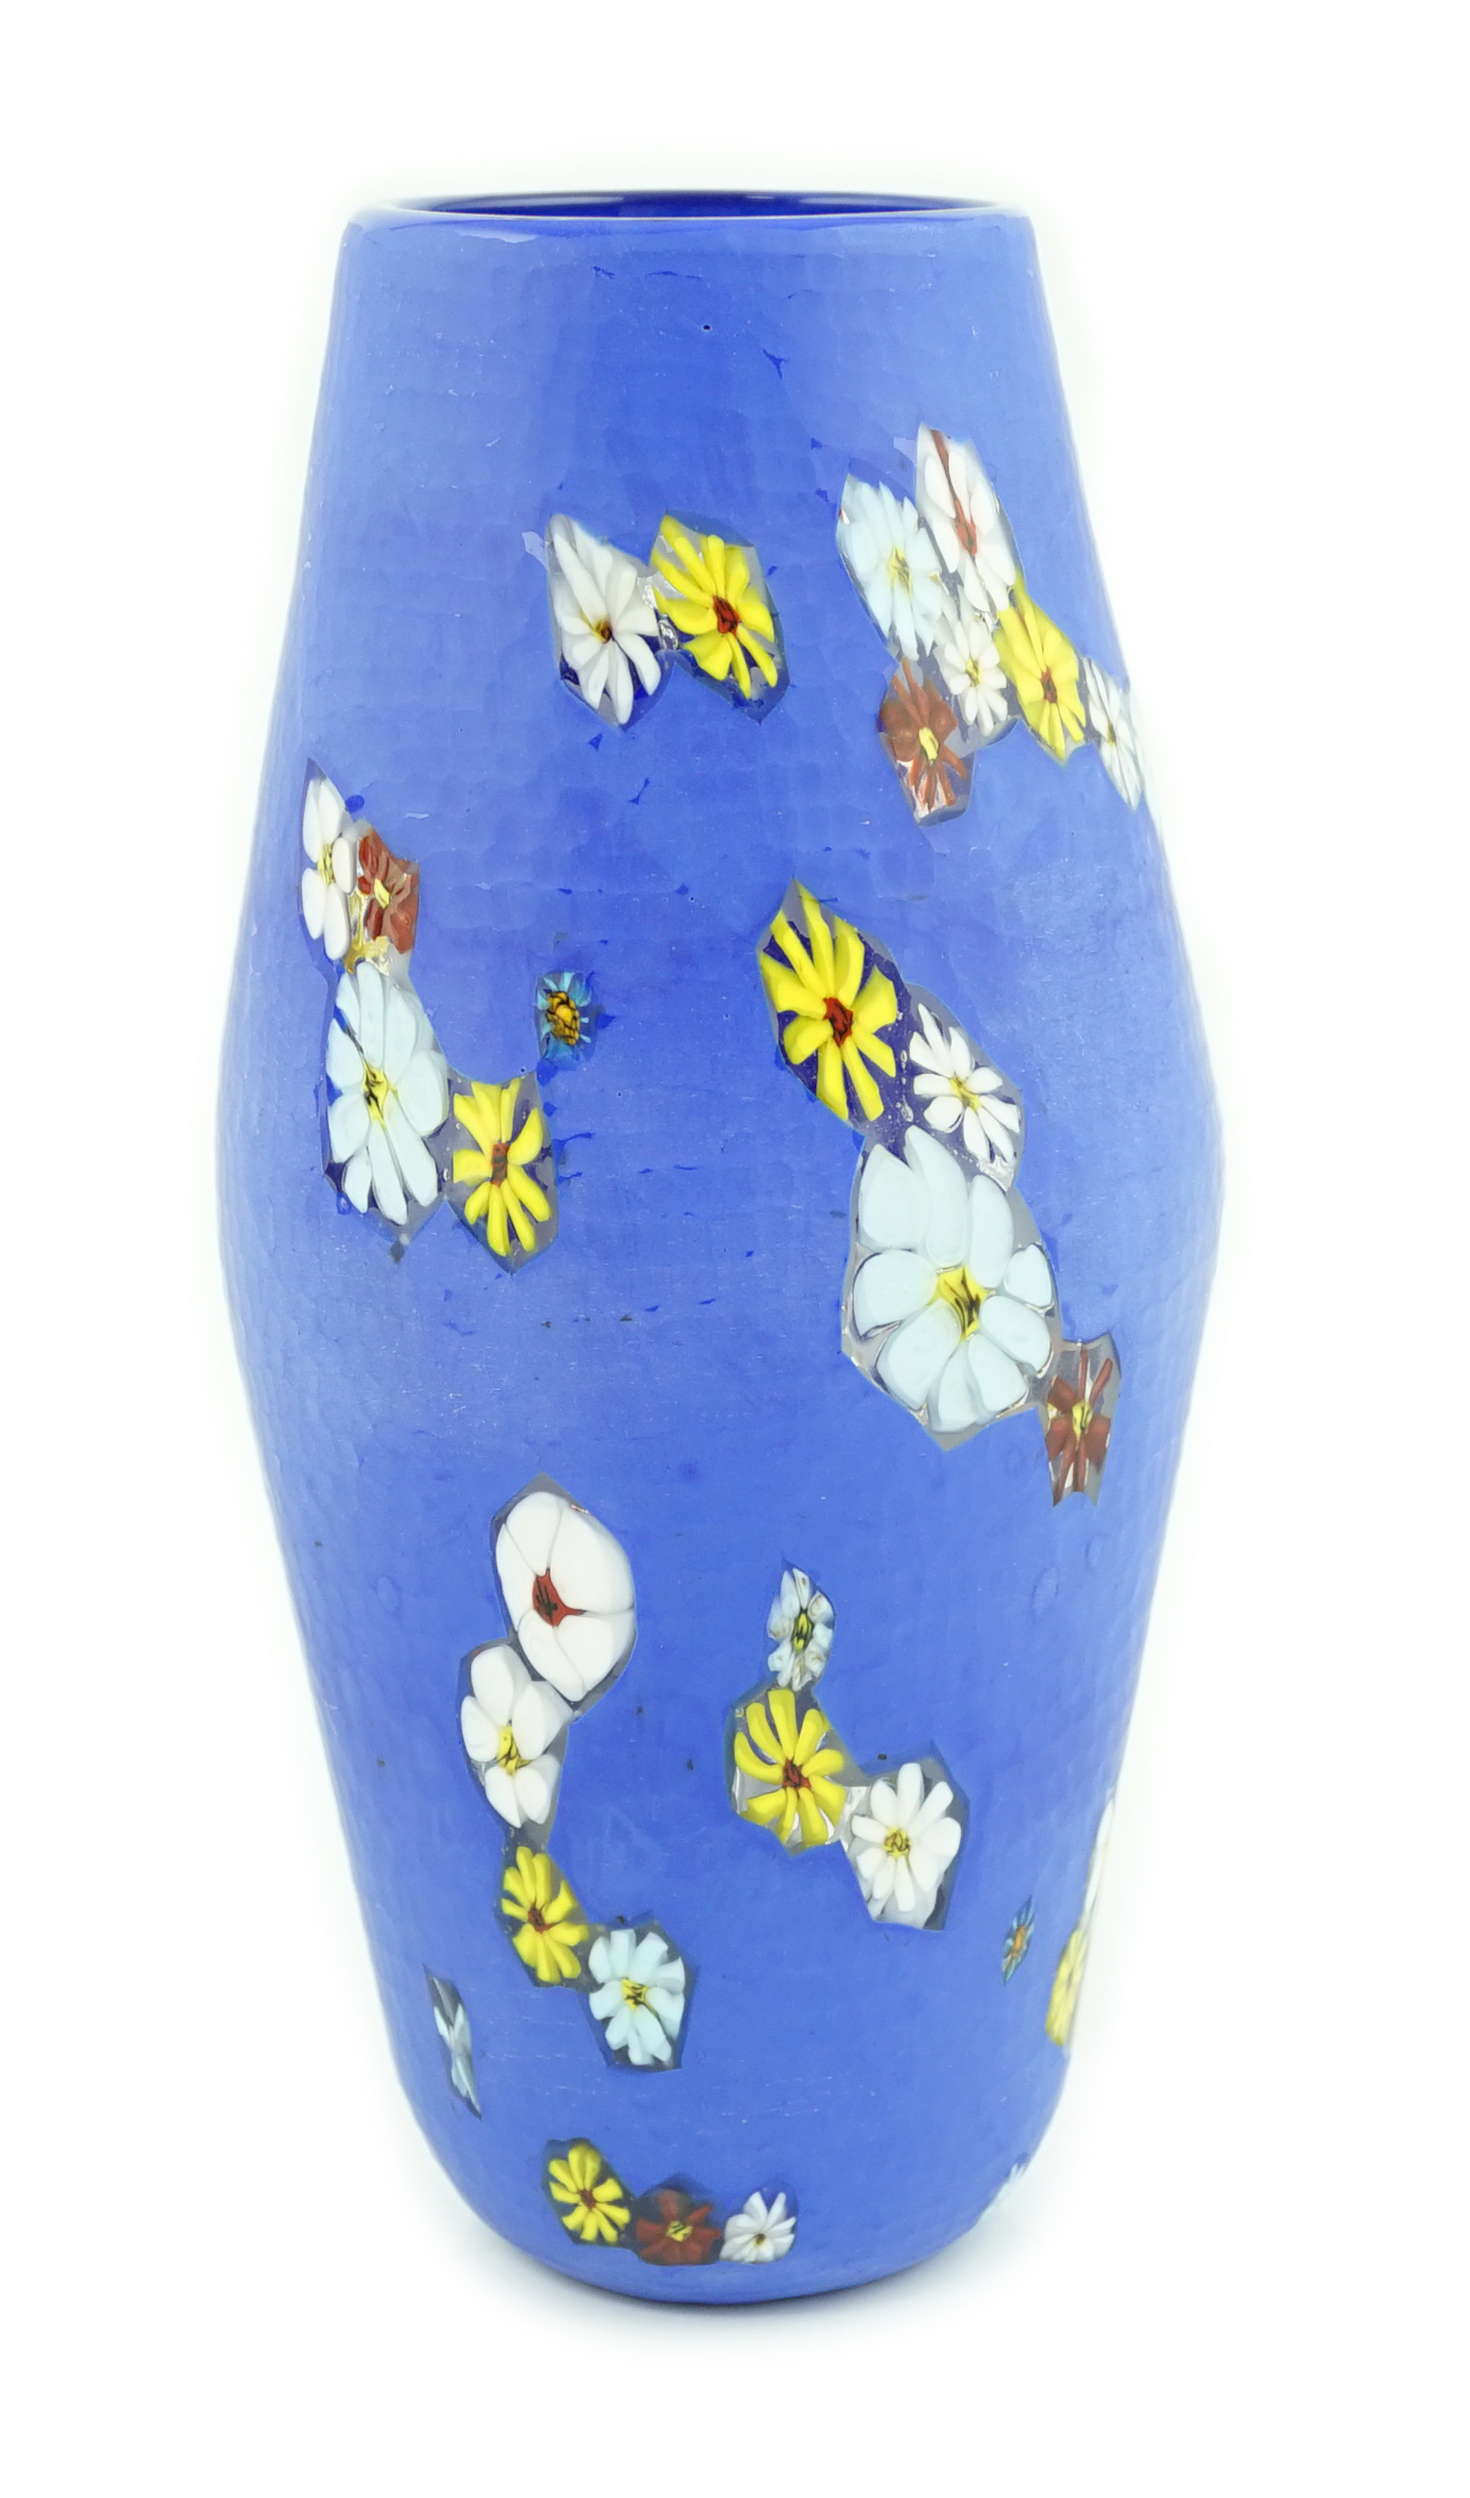 Vittorio Ferro (1932-2012) A Murano glass Murrine vase, the blue ground scattered with polychrome flowers, unsigned, 29cm, Please note this lot attracts an additional import tax of 20% on the hammer price